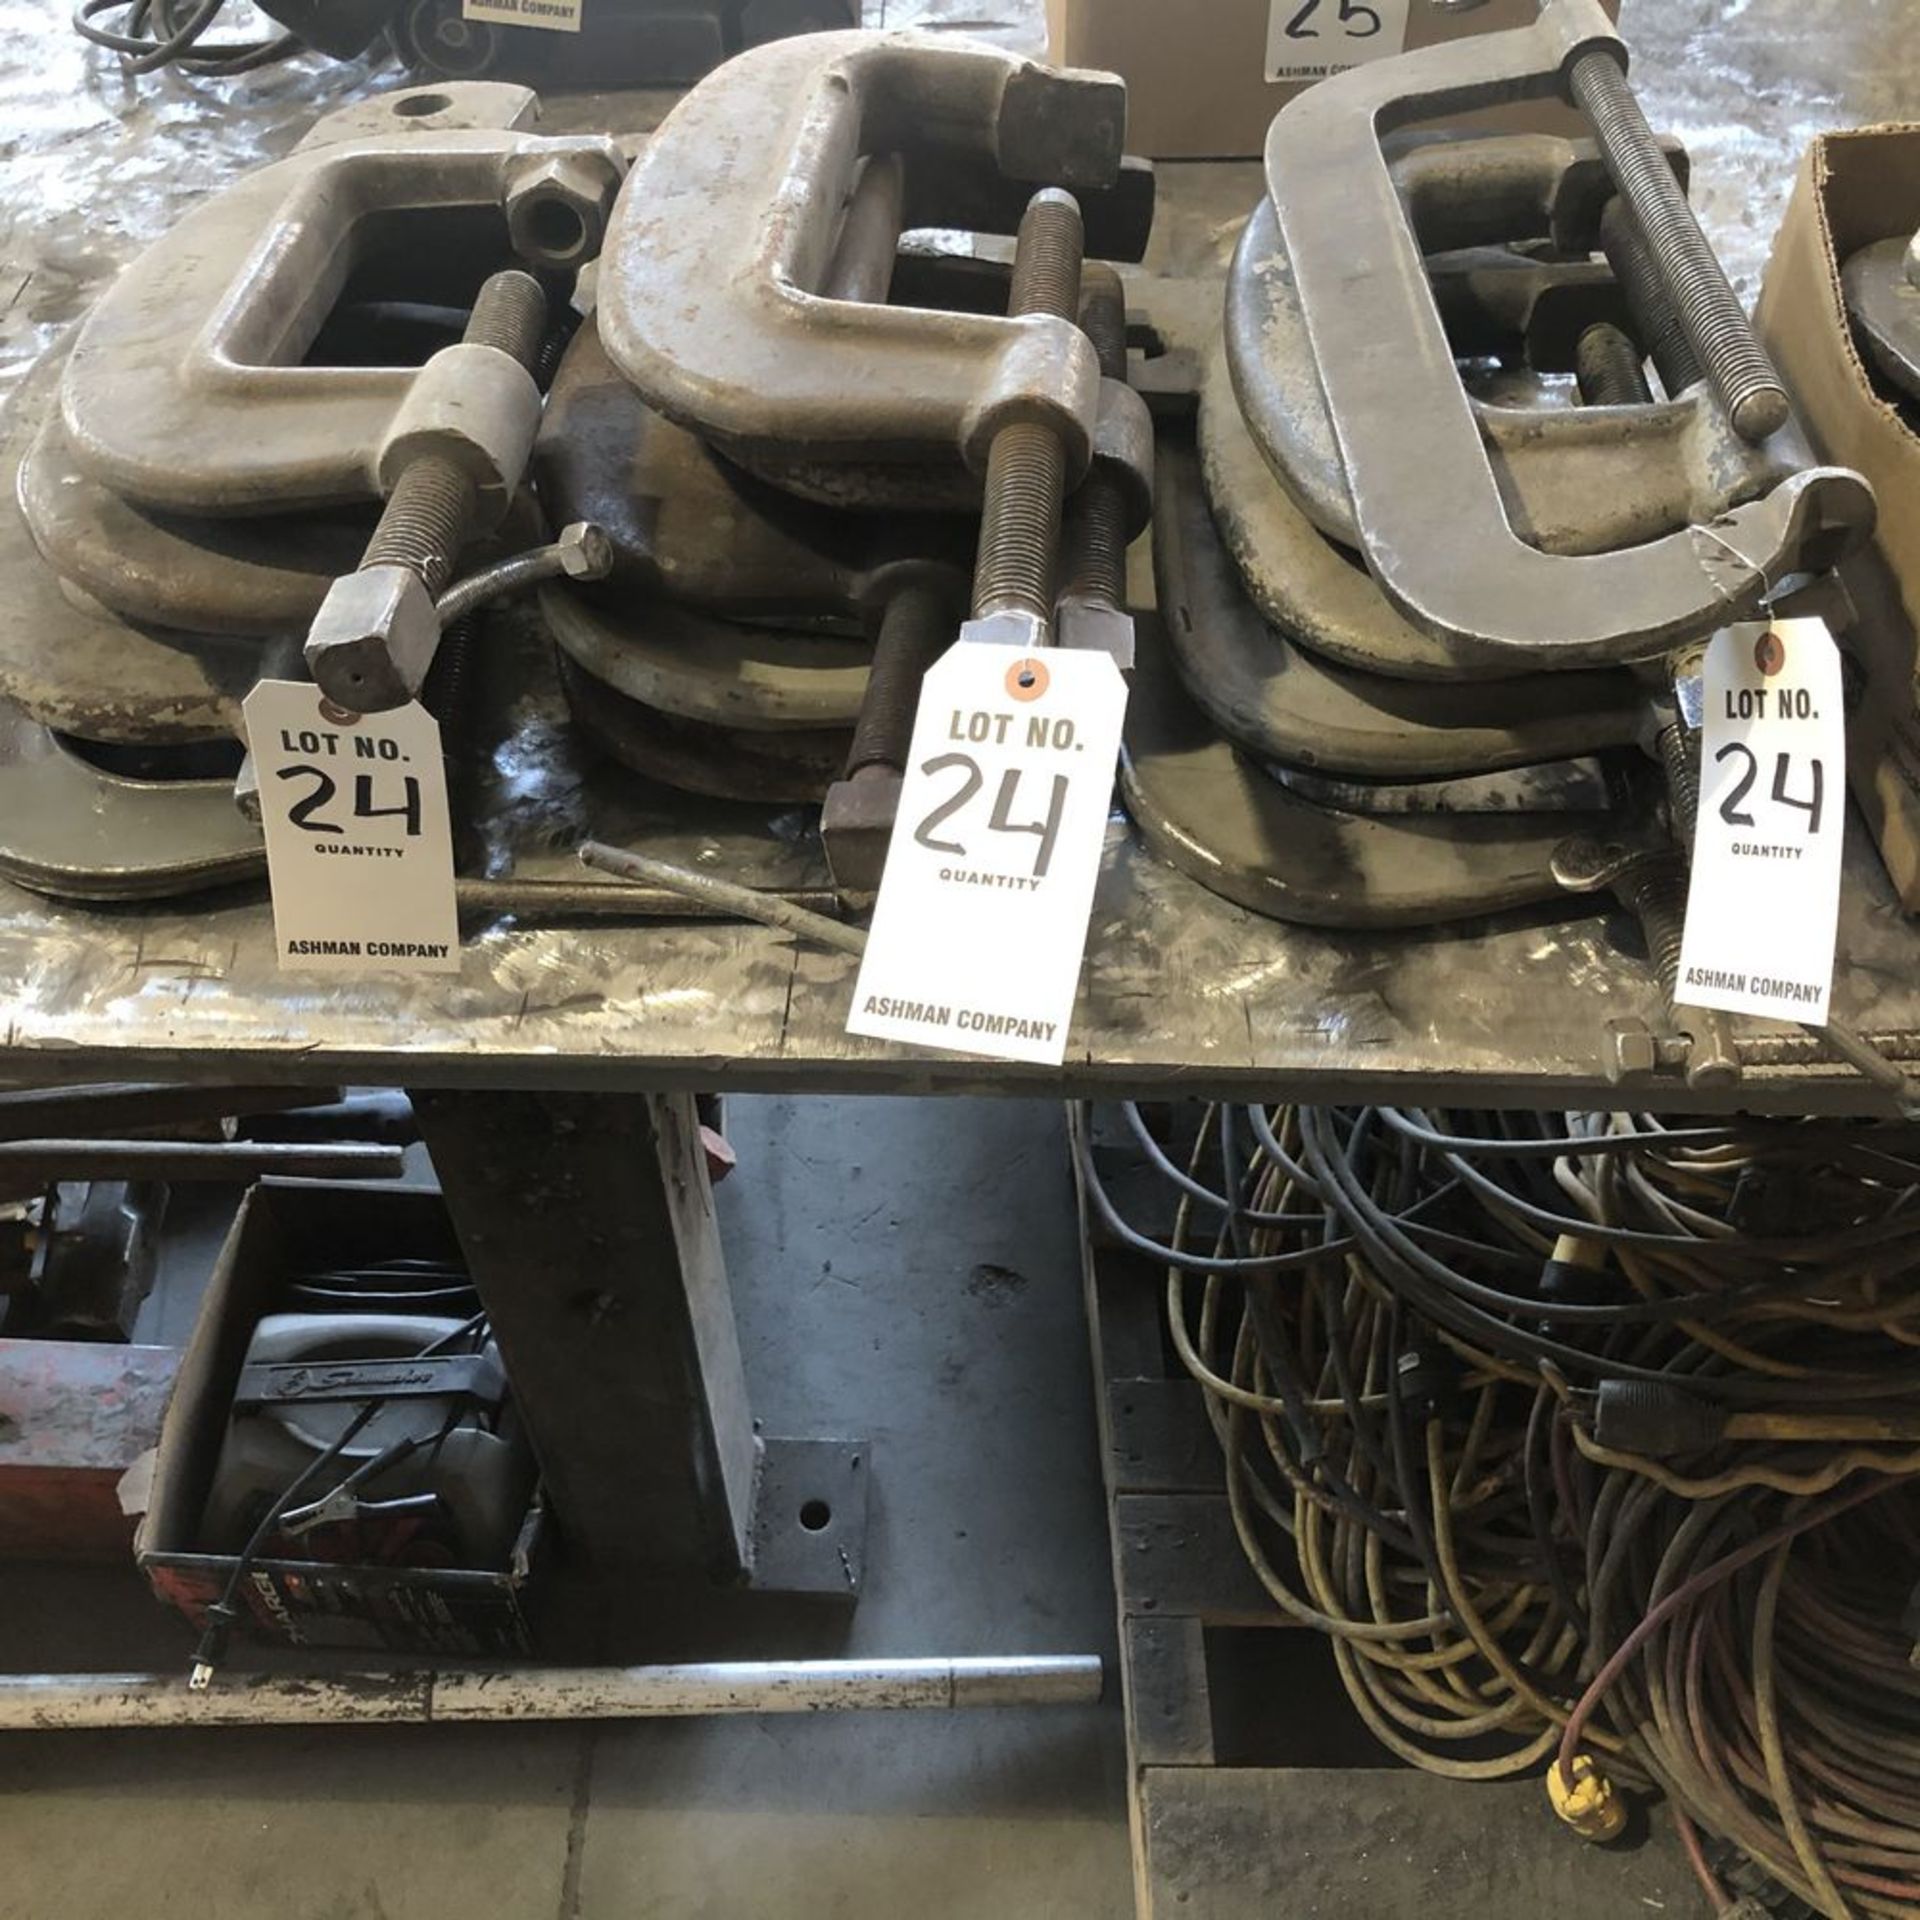 (15) Boxes of C-Clamps